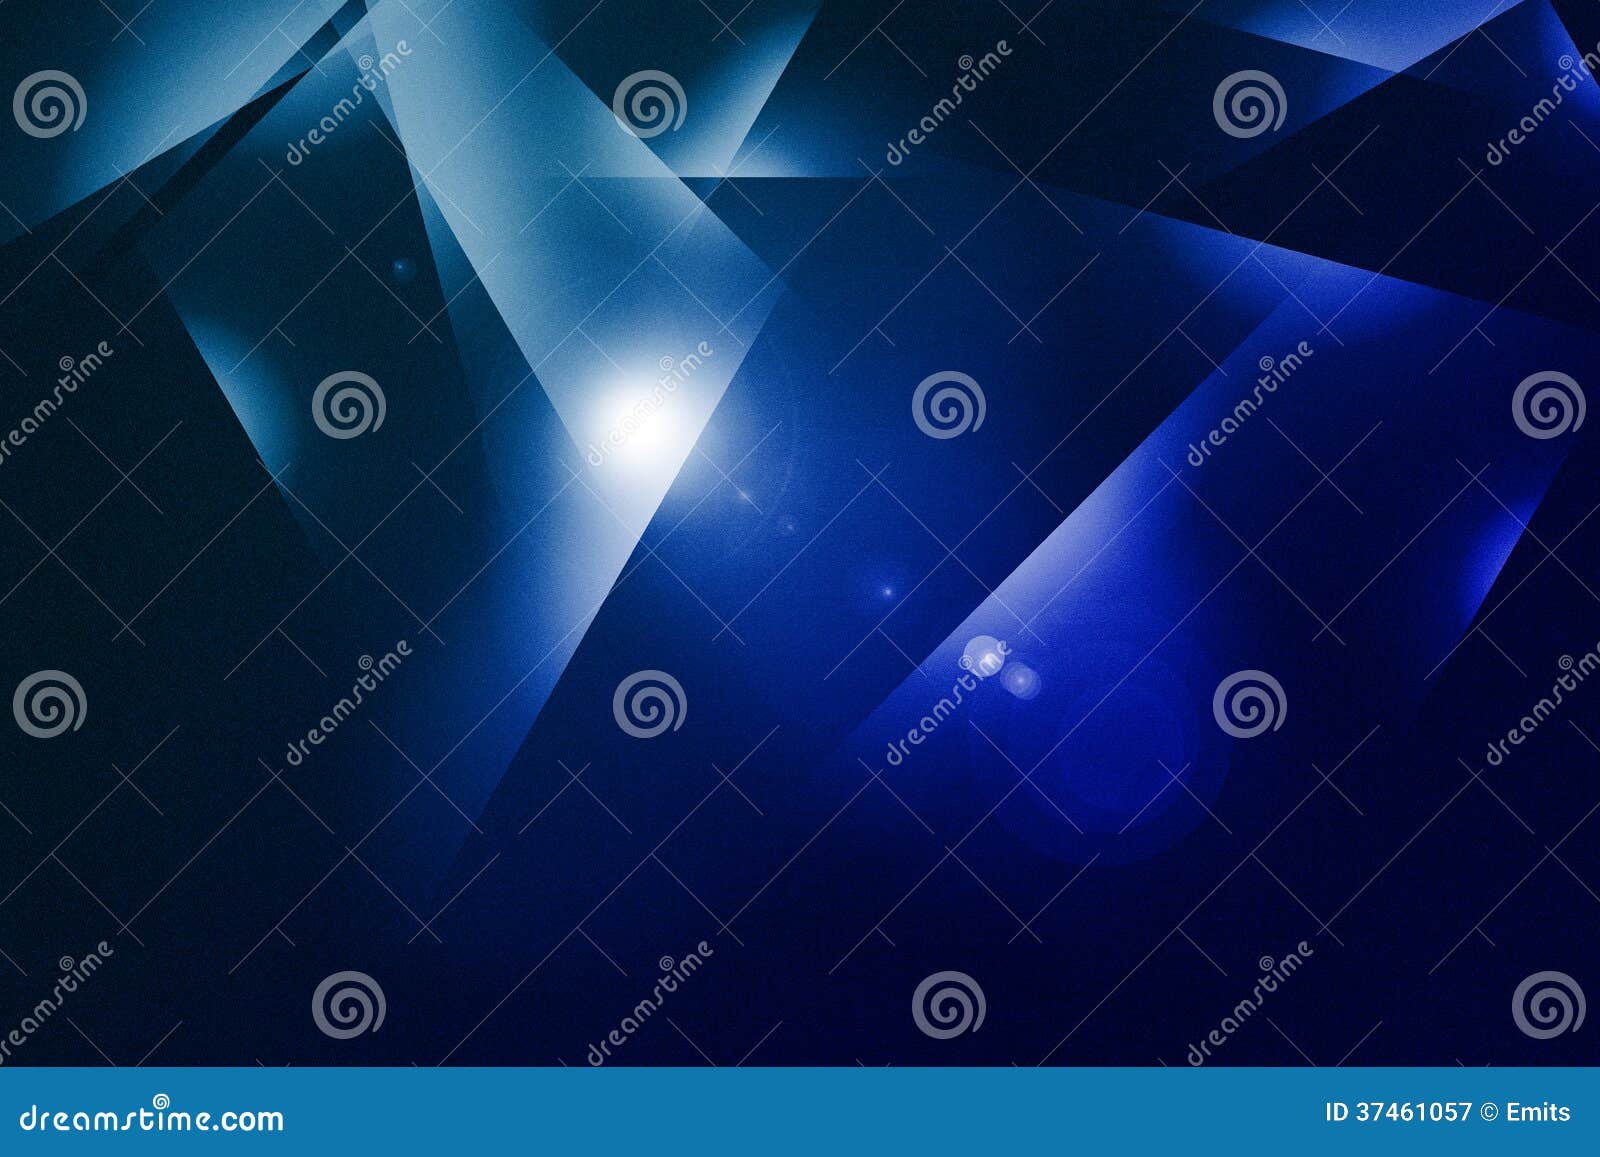 abstract light effect background